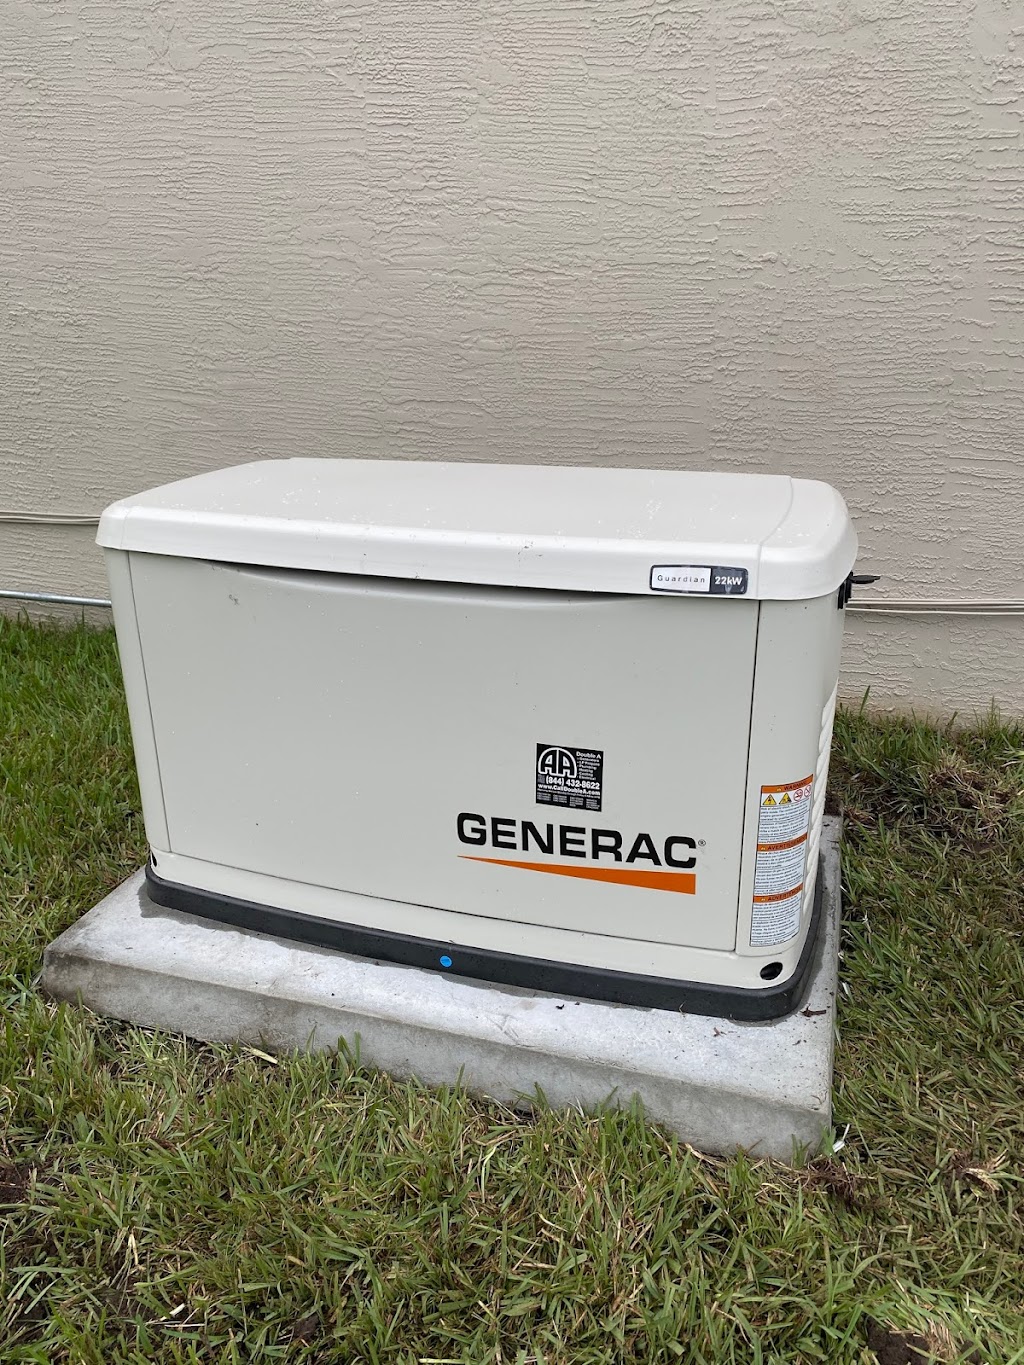 Generac Generator, Solar And Air Conditioning Dealer - Double A | 6353 Greenland Rd, Jacksonville, FL 32258 | Phone: (844) 432-8622